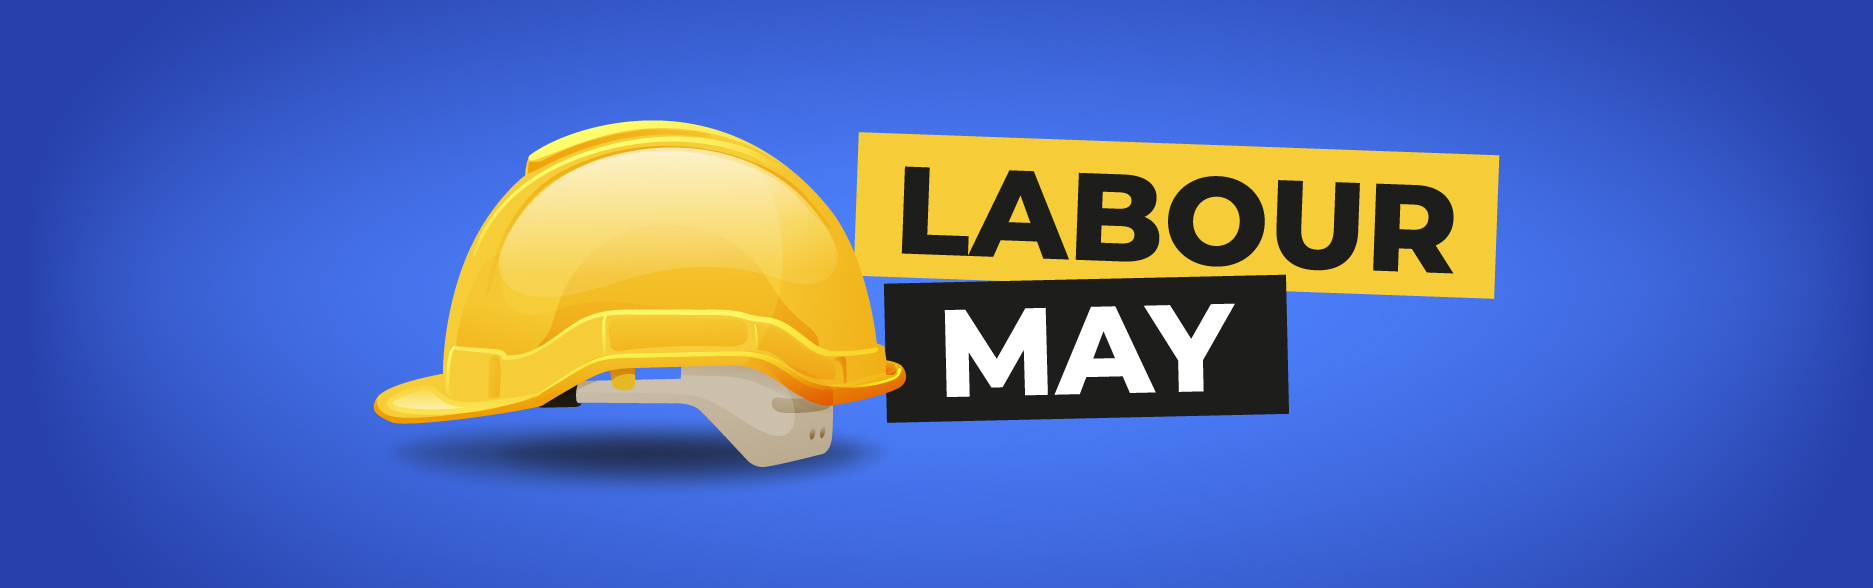 slide-labour-may